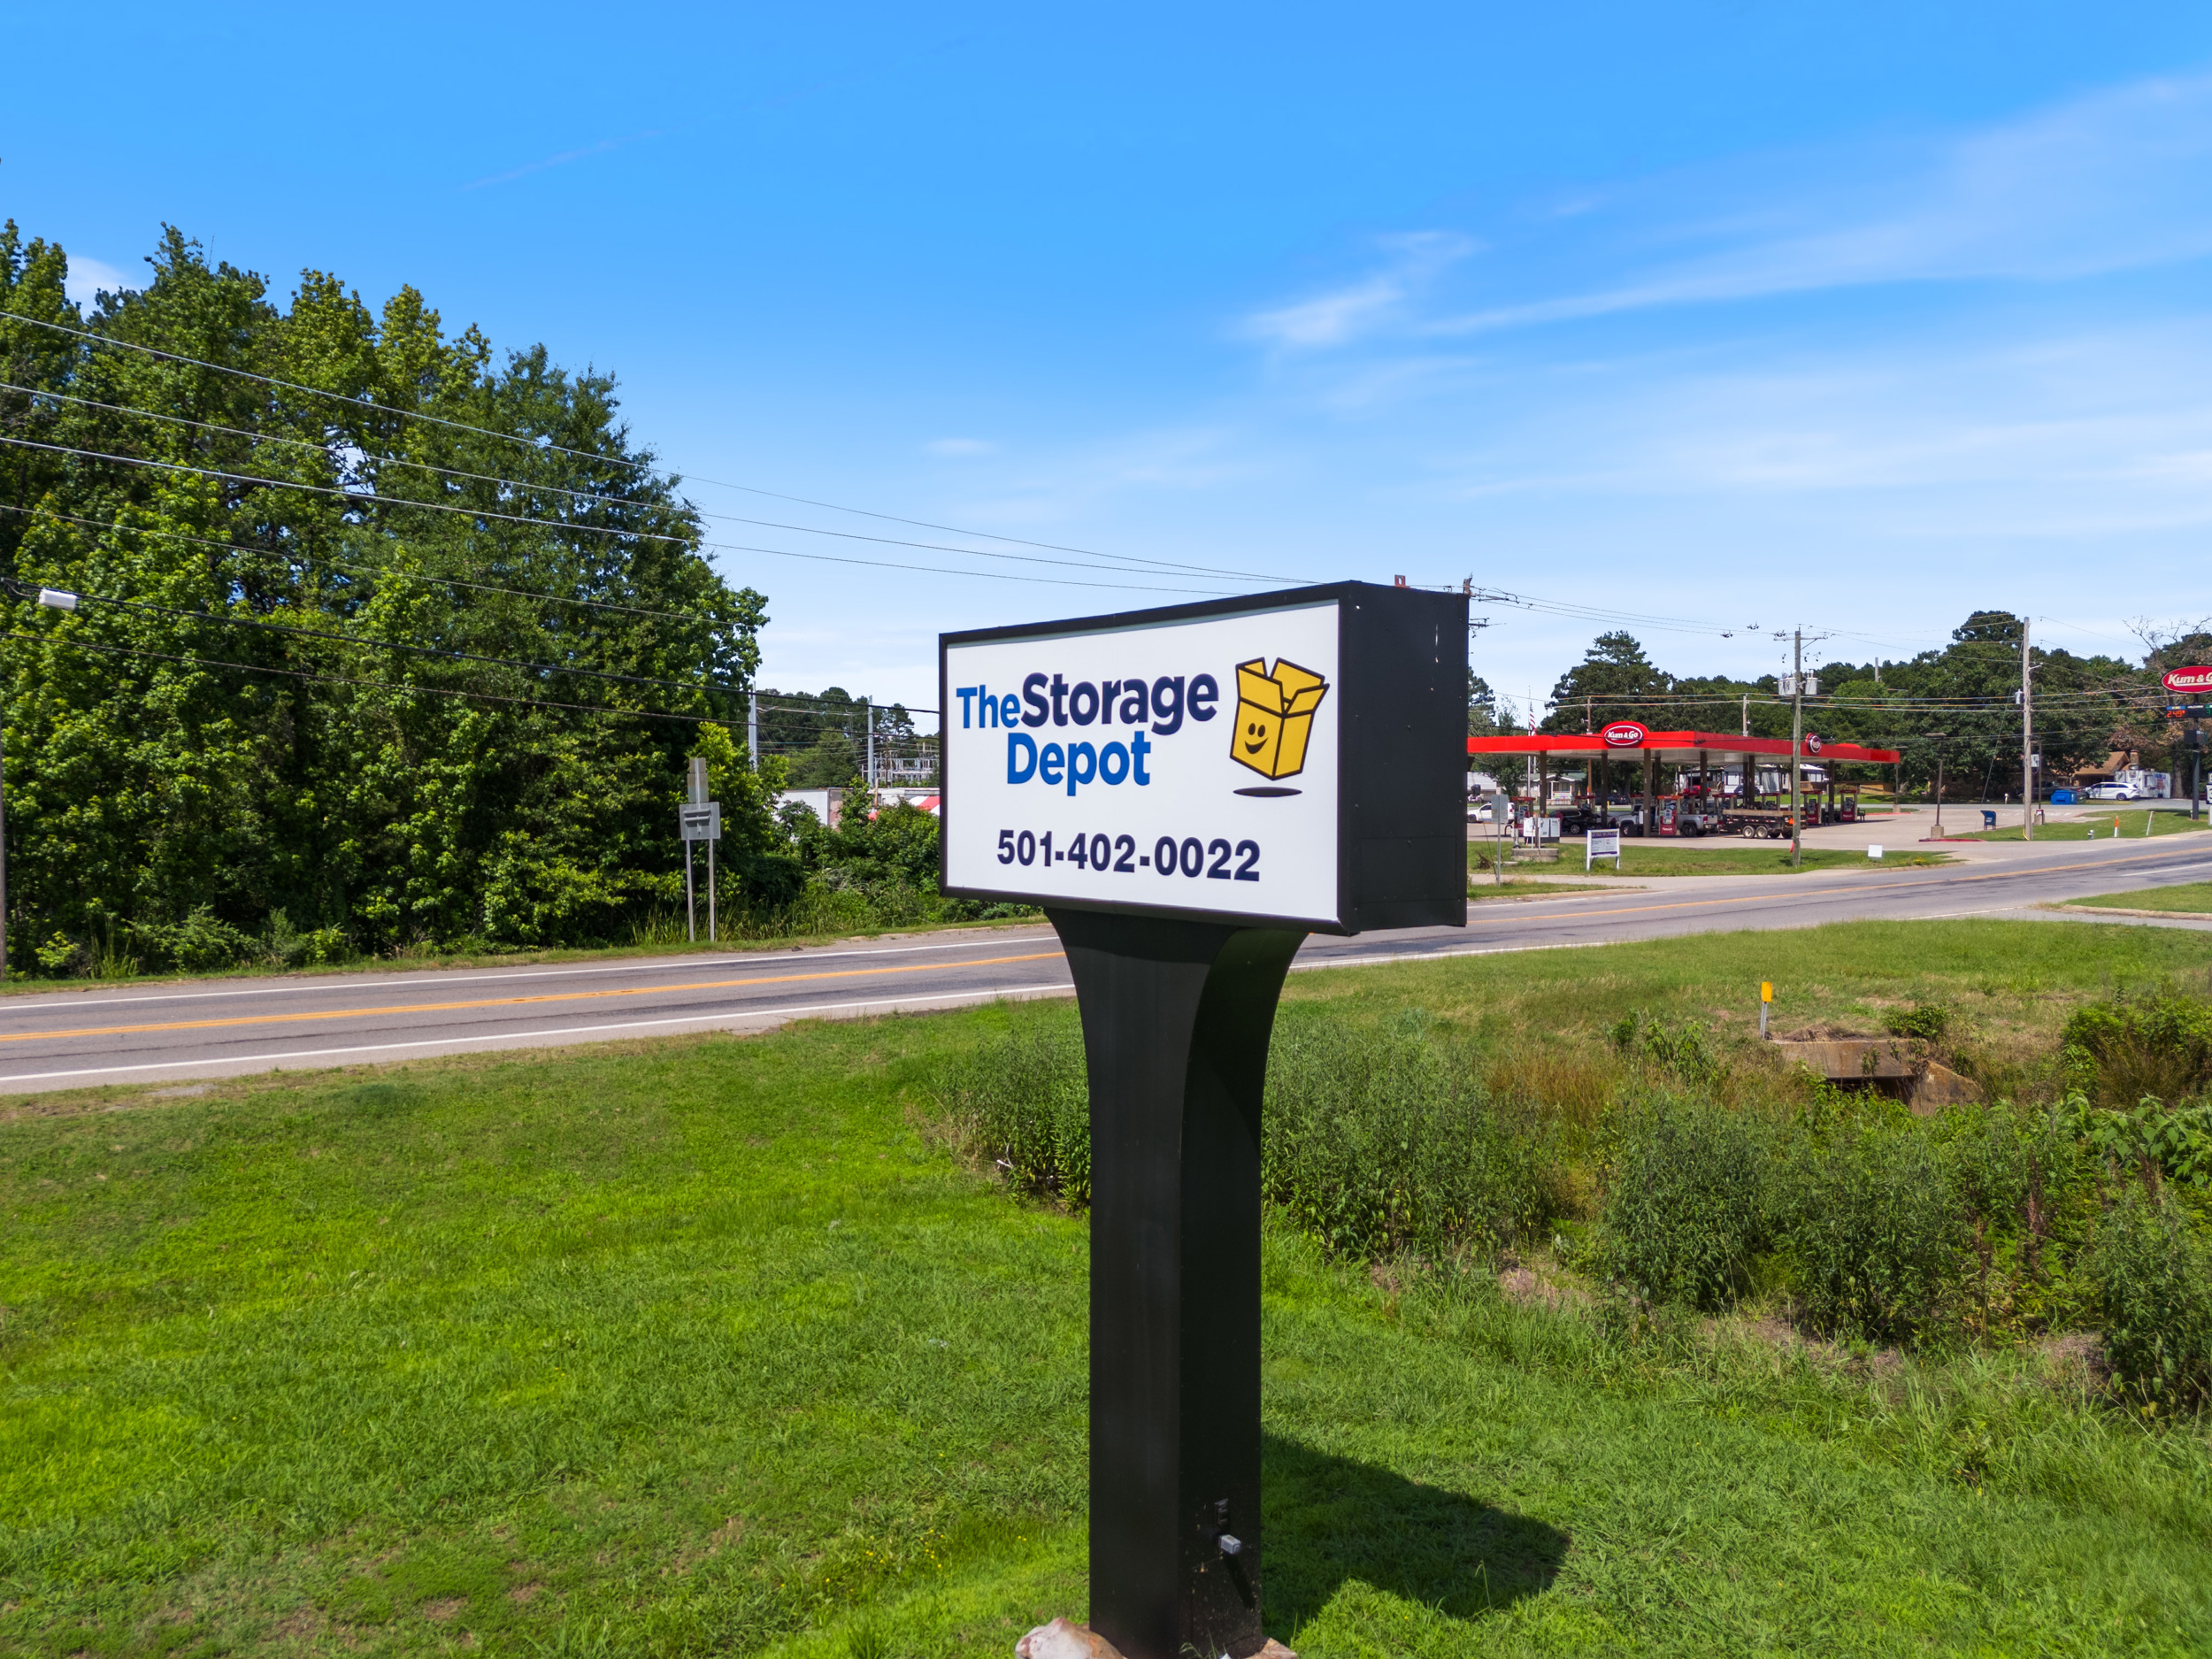 The Storage Depot roadway sign